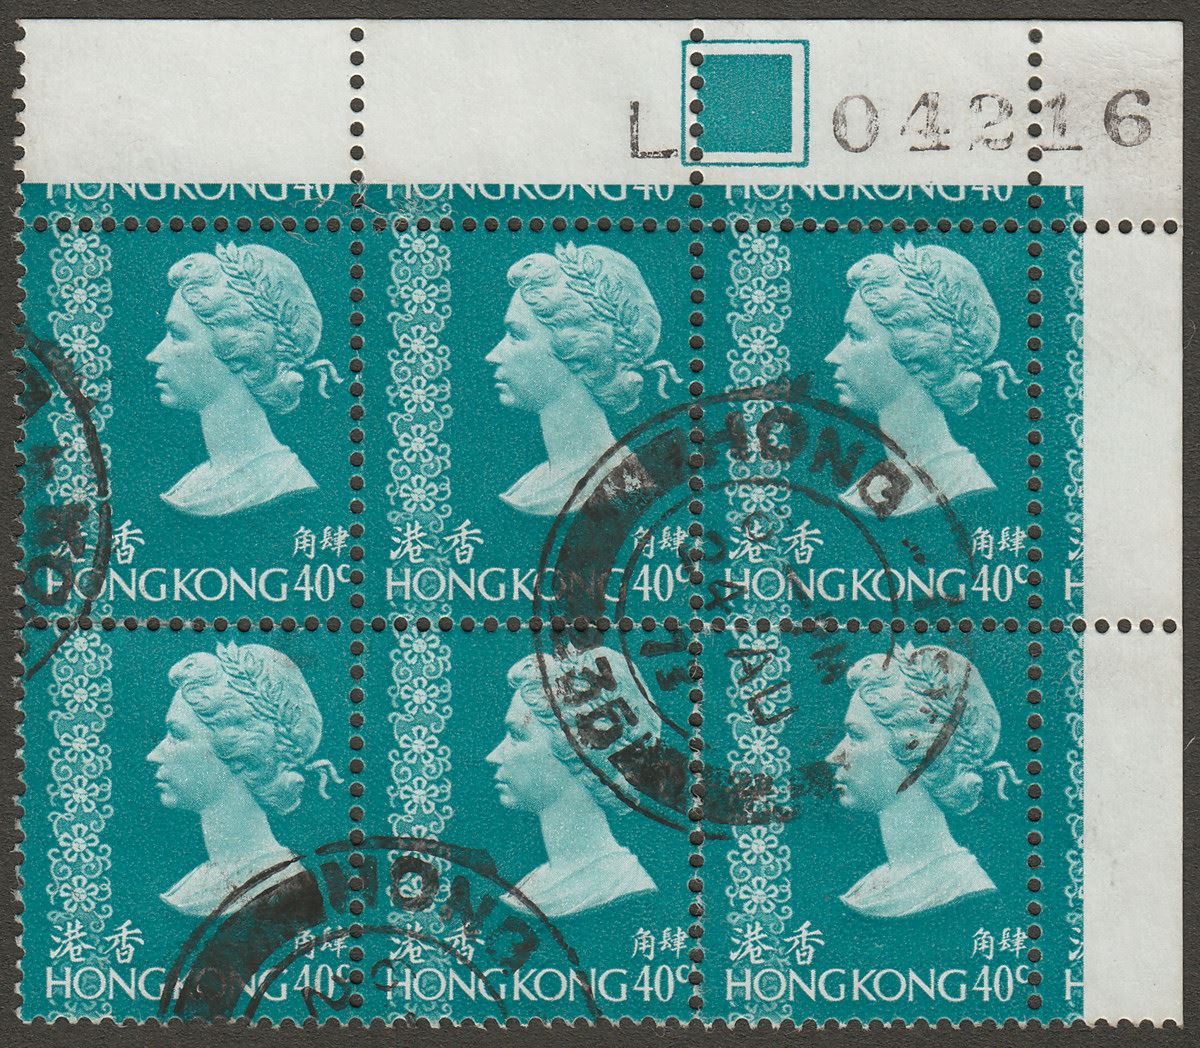 Hong Kong 1973 QEII 40c Block of 6 with Requisition Letter L Sheet No Used SG288